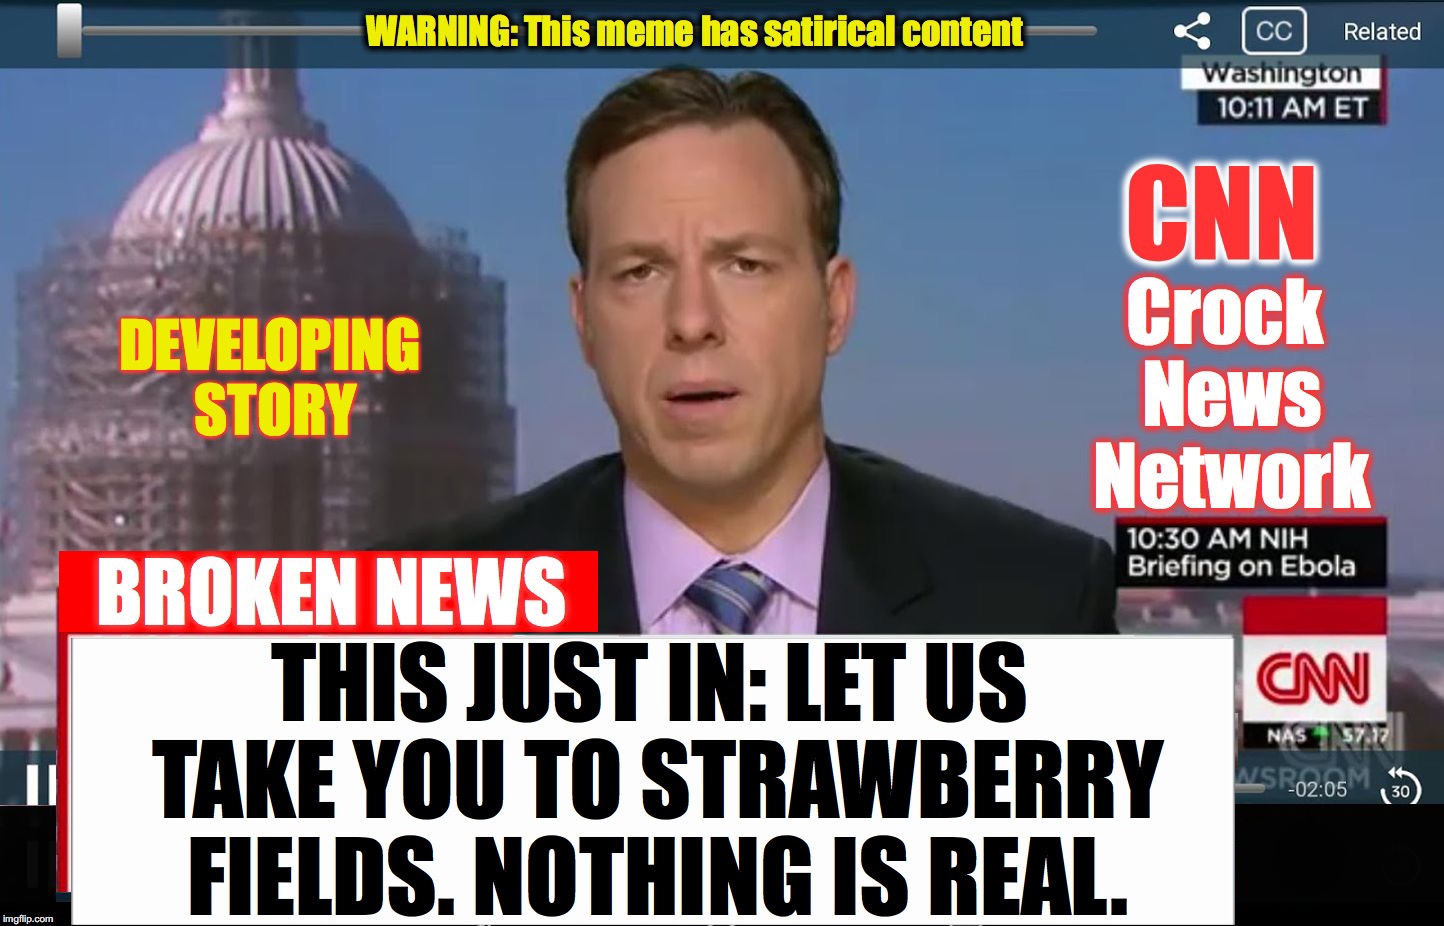 CNN Fields Forever... Let them take you down | DEVELOPING STORY; THIS JUST IN: LET US TAKE YOU TO STRAWBERRY FIELDS. NOTHING IS REAL. | image tagged in cnn crock news network | made w/ Imgflip meme maker